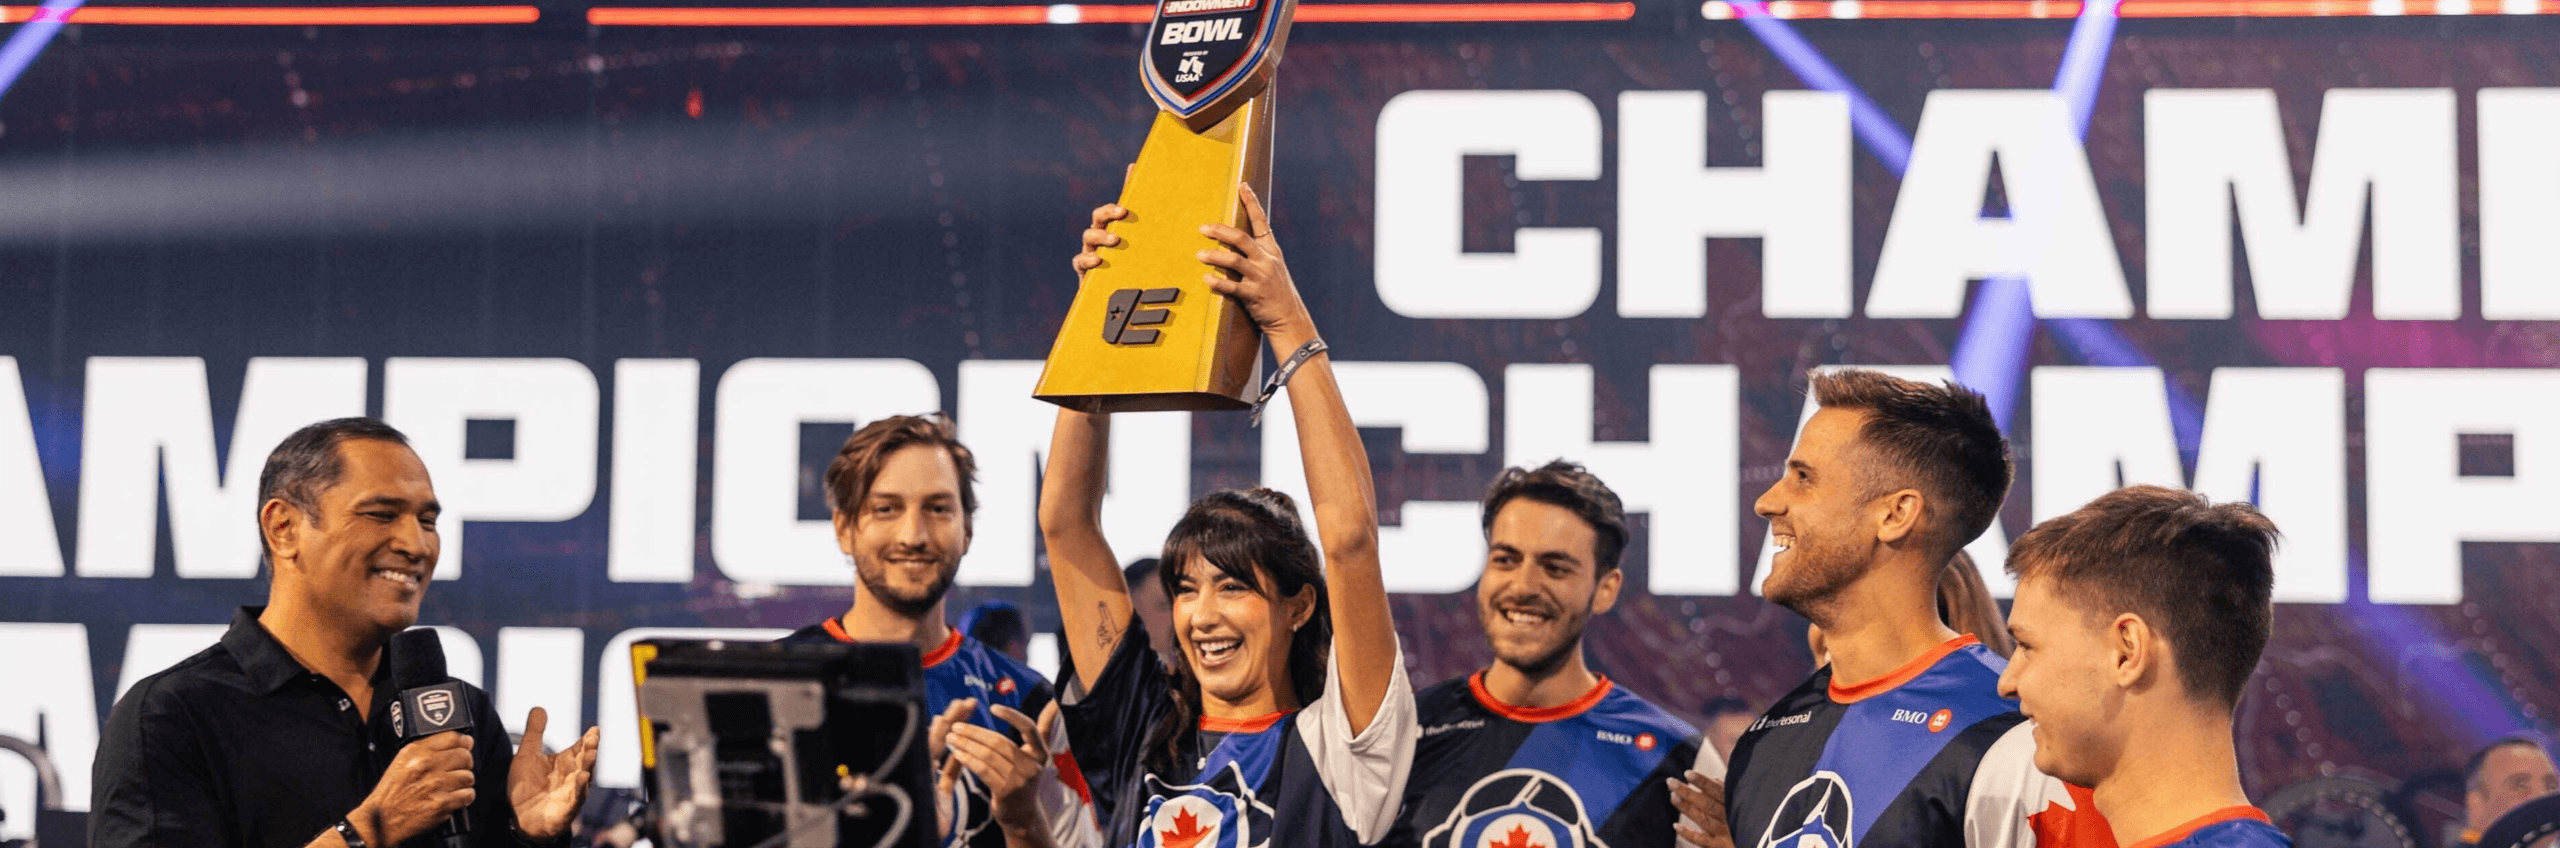 A Call of Duty: Warzone esports team raises a trophy to their victory.